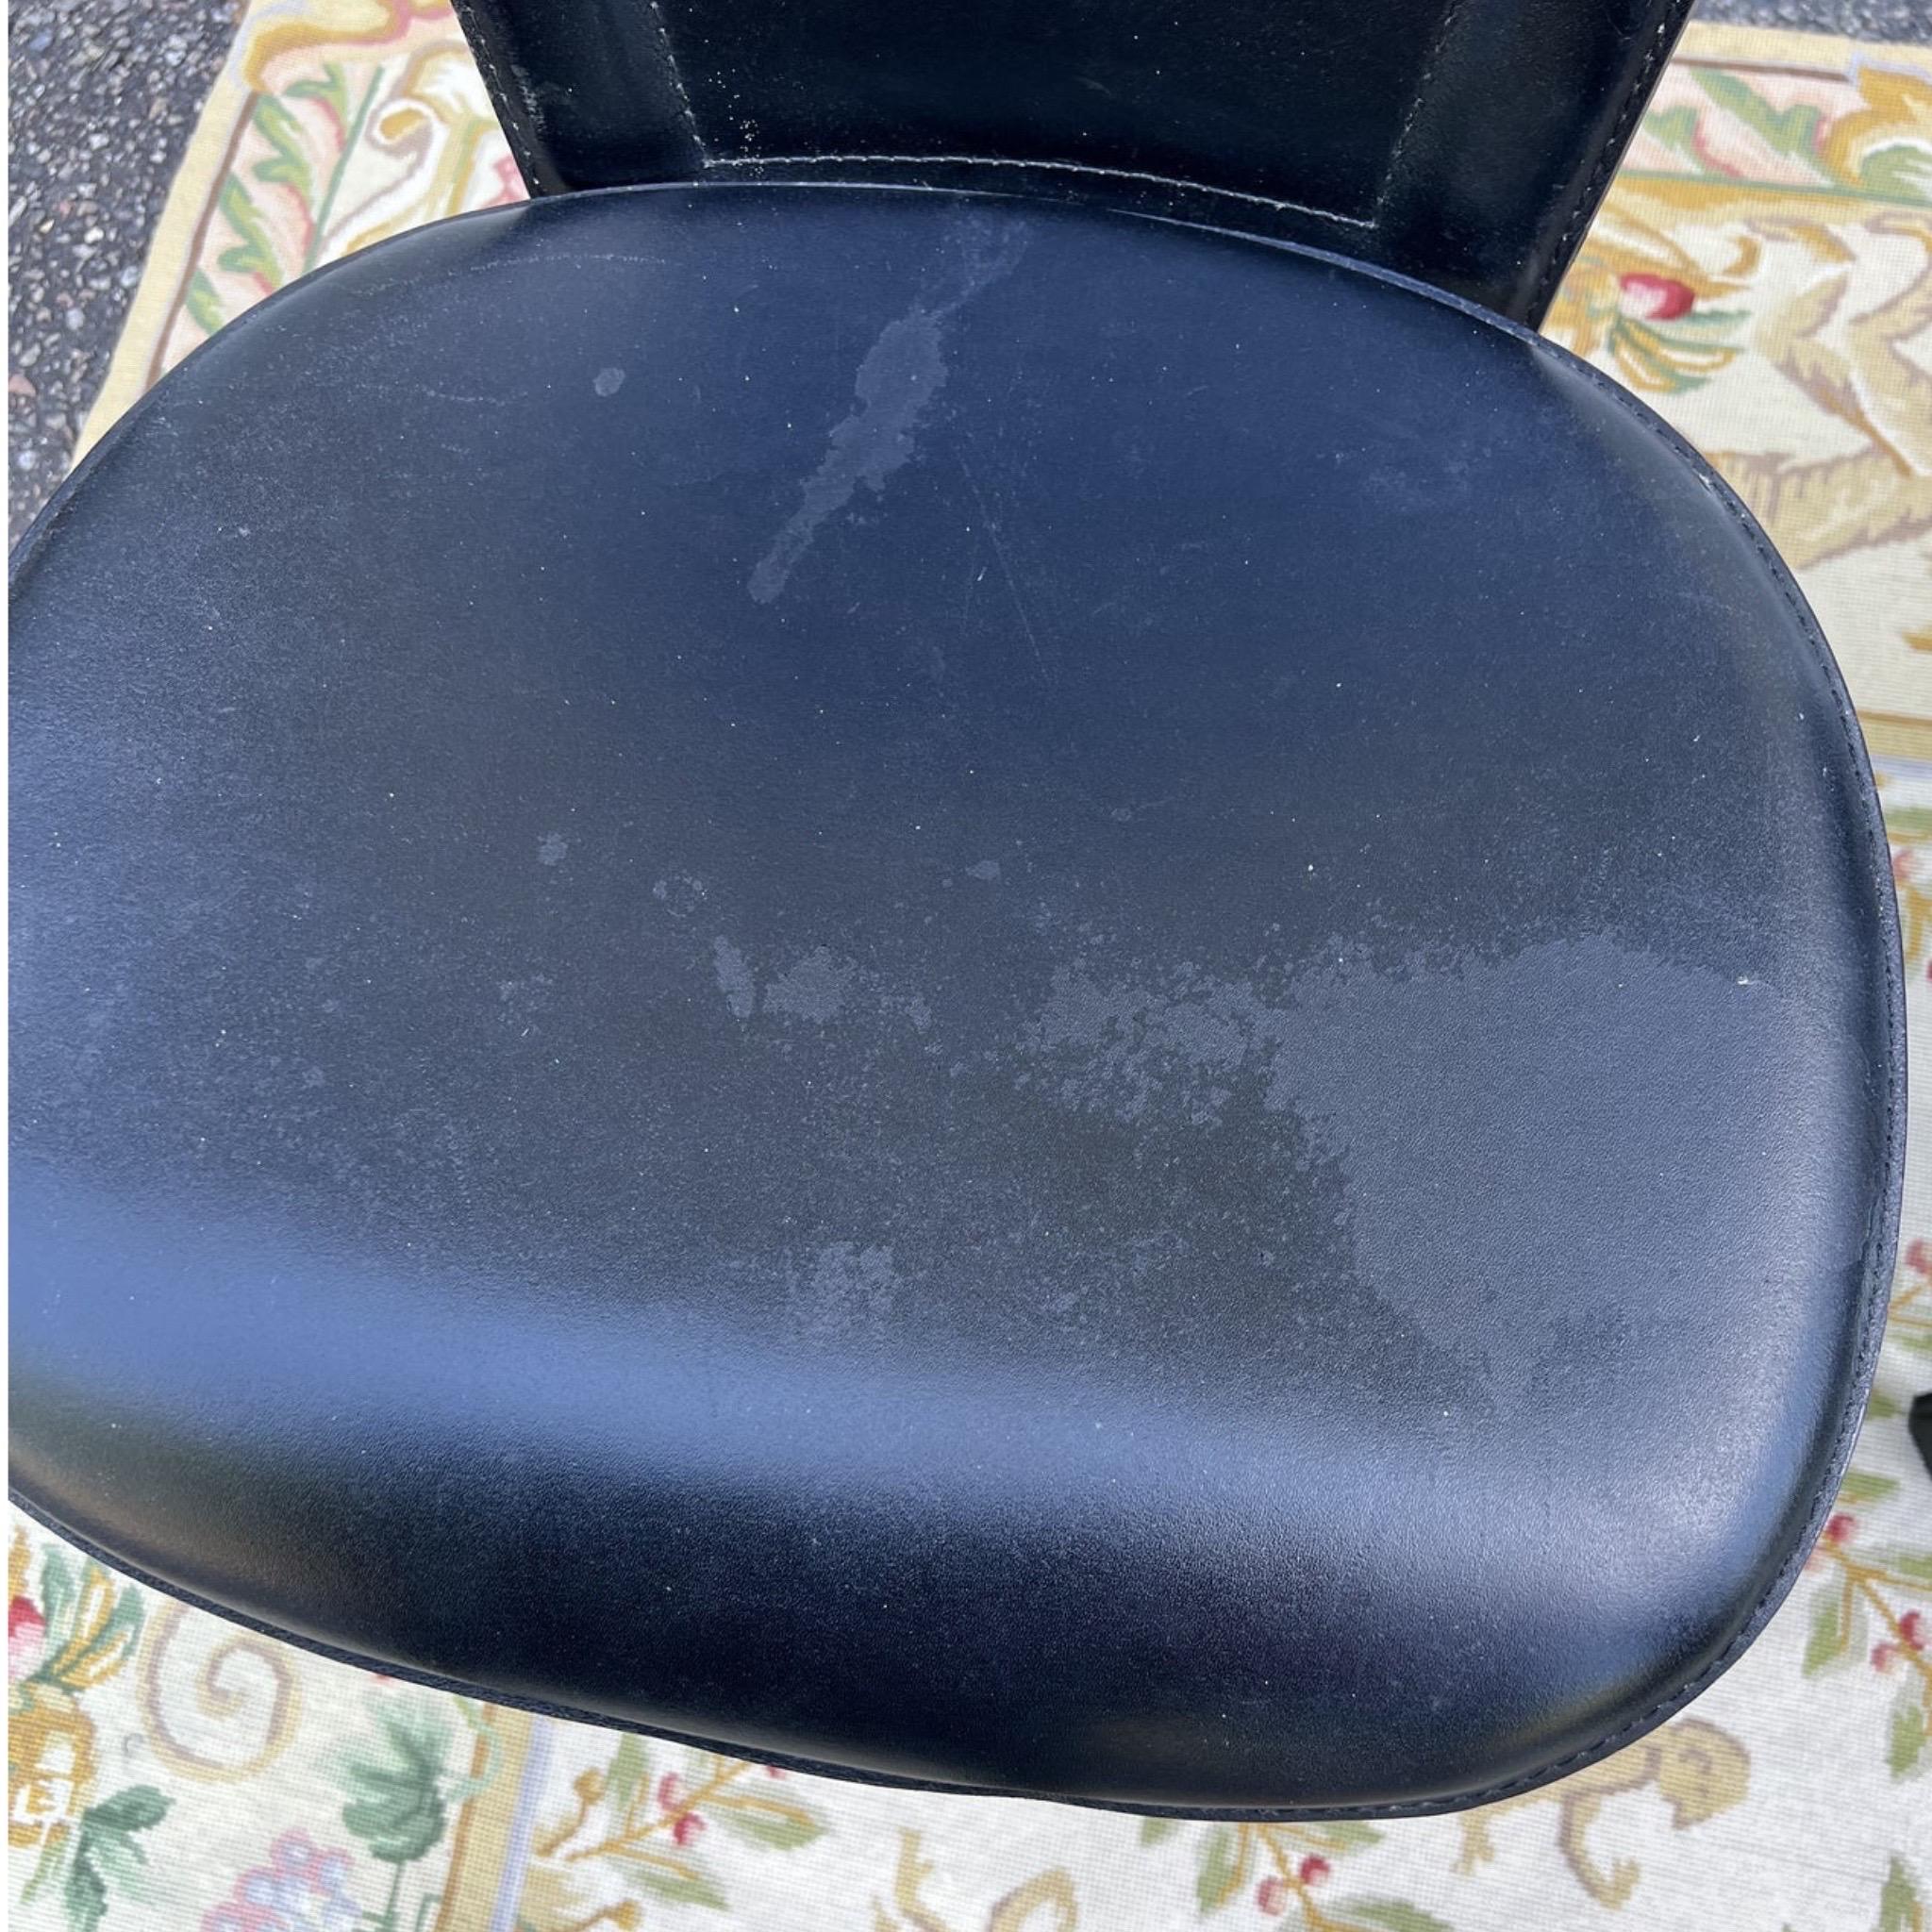 Vintage 1980s Italian leather dining chairs. The frames are metal. The front of the seat is rounded and curves down and the back legs splay inward. There is minor wear from age and use but overall in very good condition with no rips or holes in the